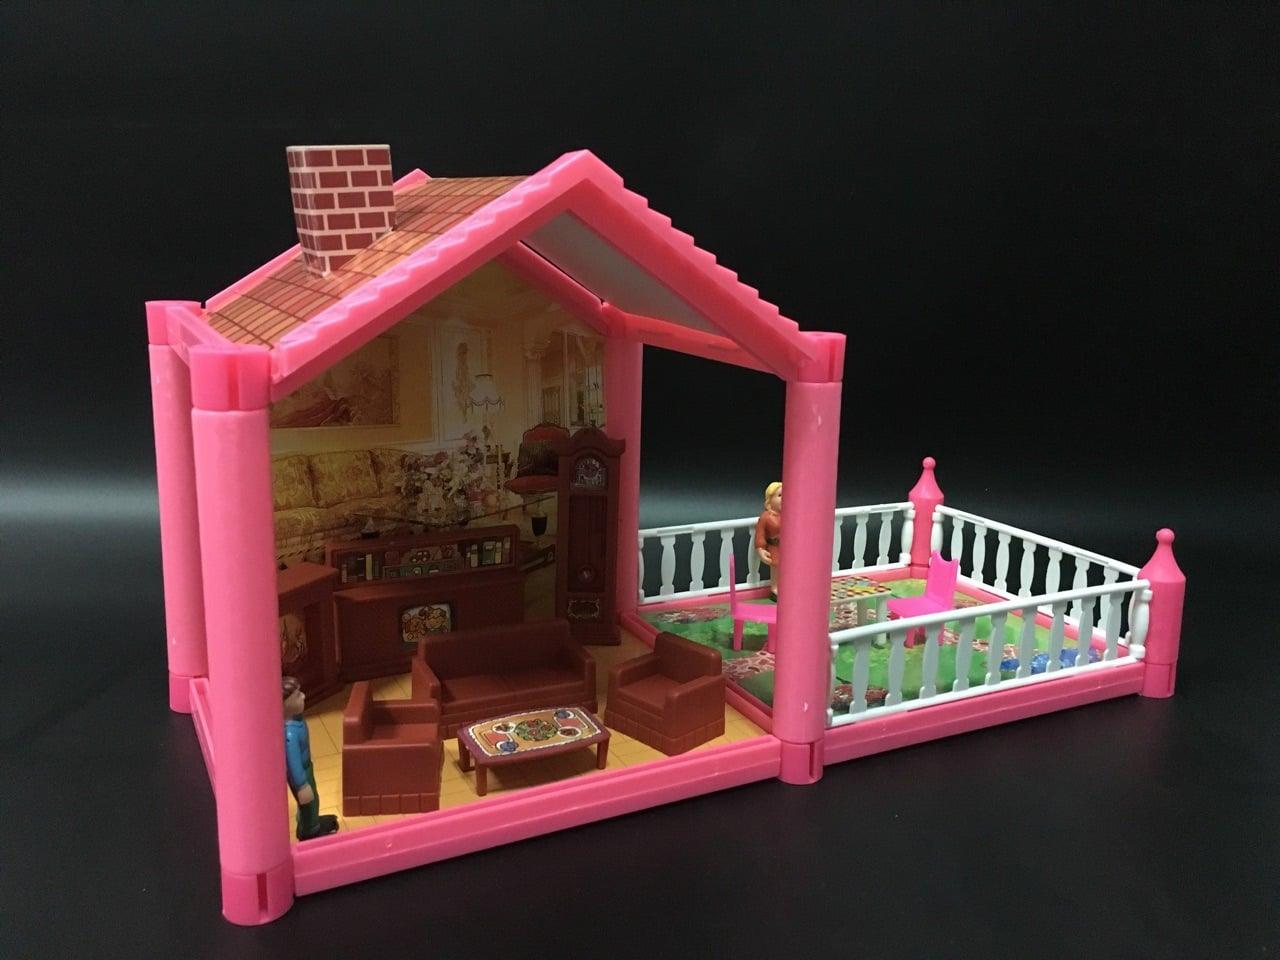 Large Size Colorful Plastic Doll House - Stylus Kids